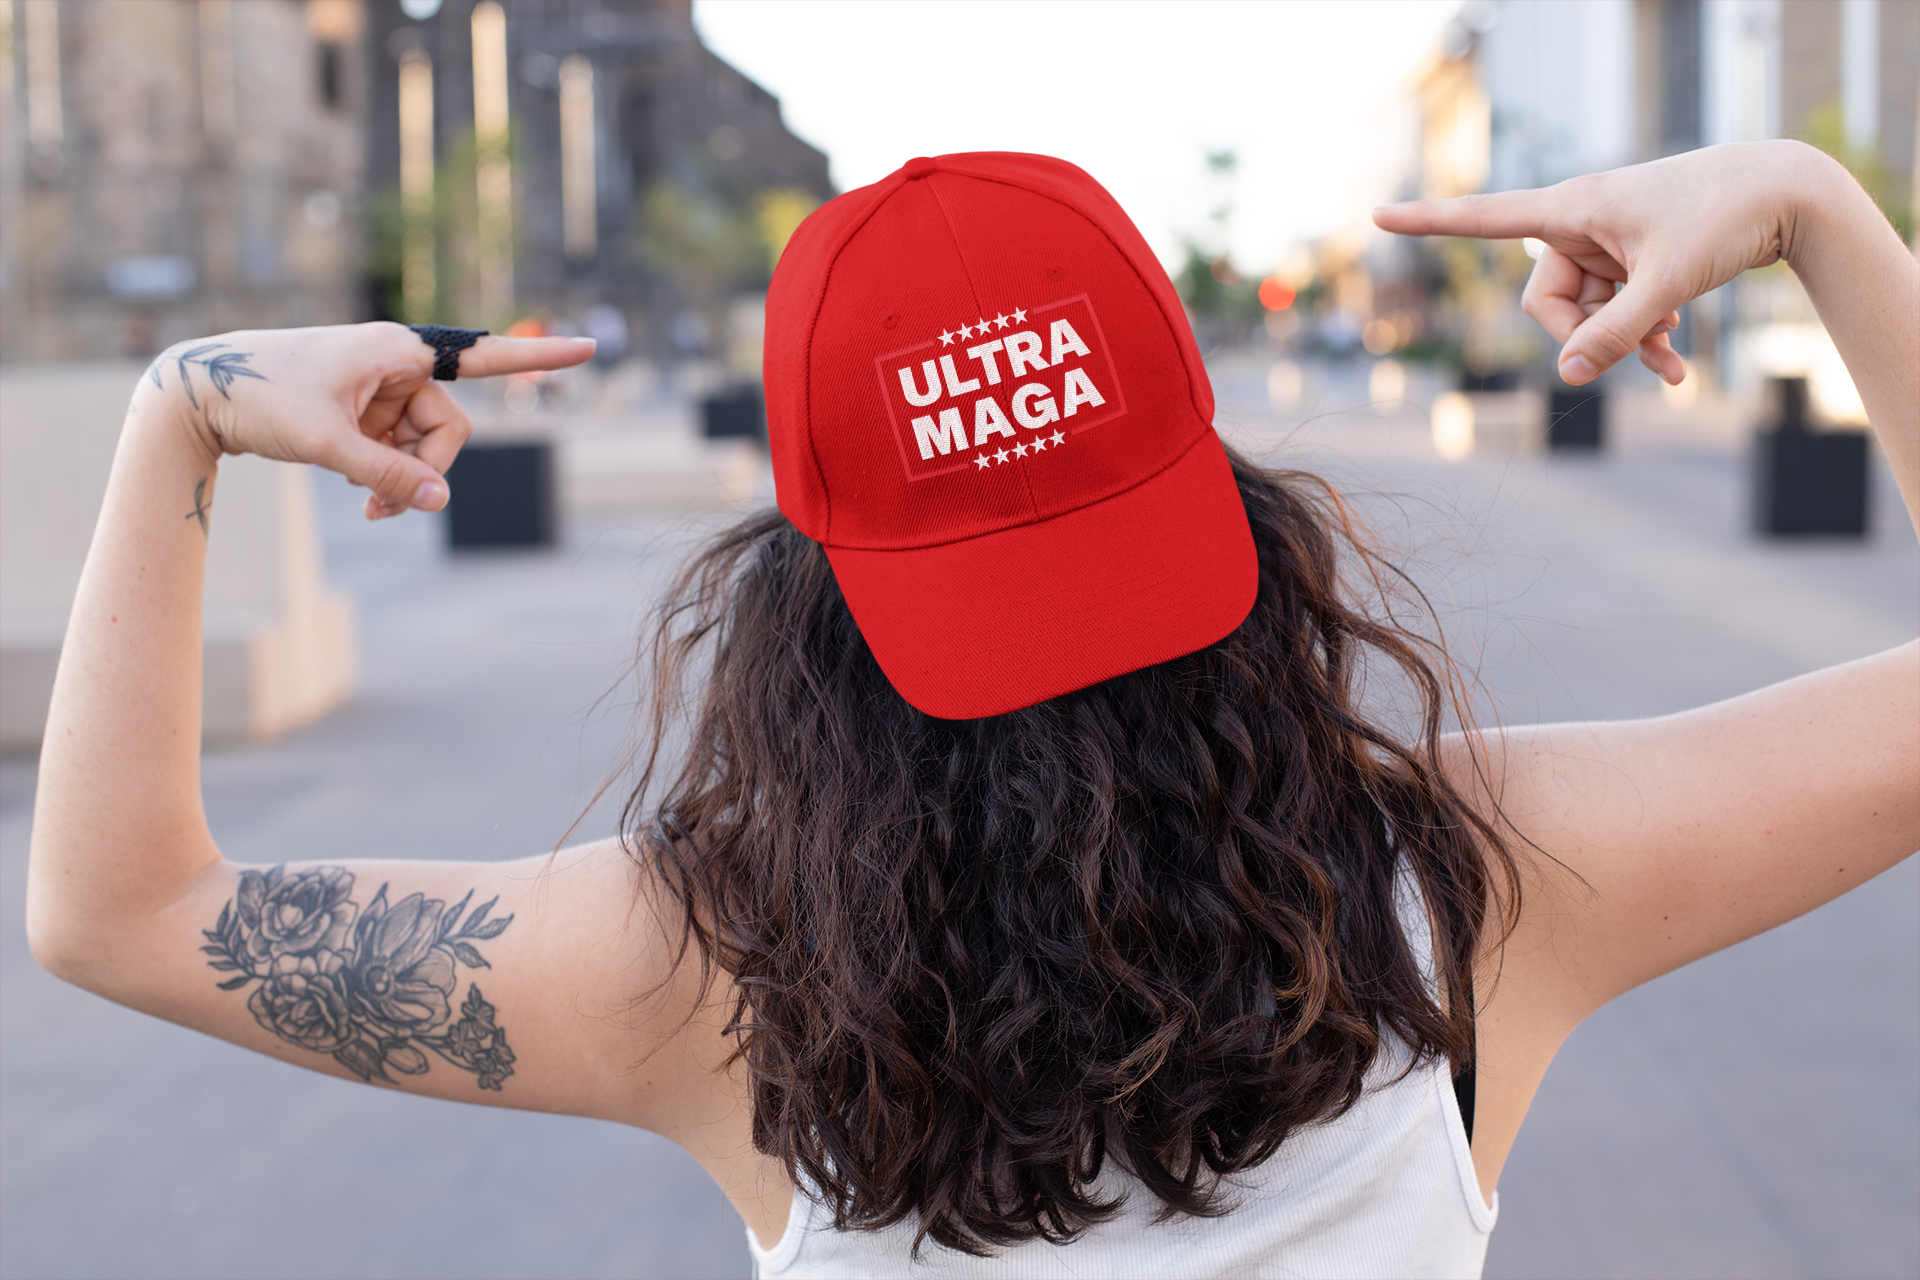 Show off American Pride with merchandise from TrumpTrendz